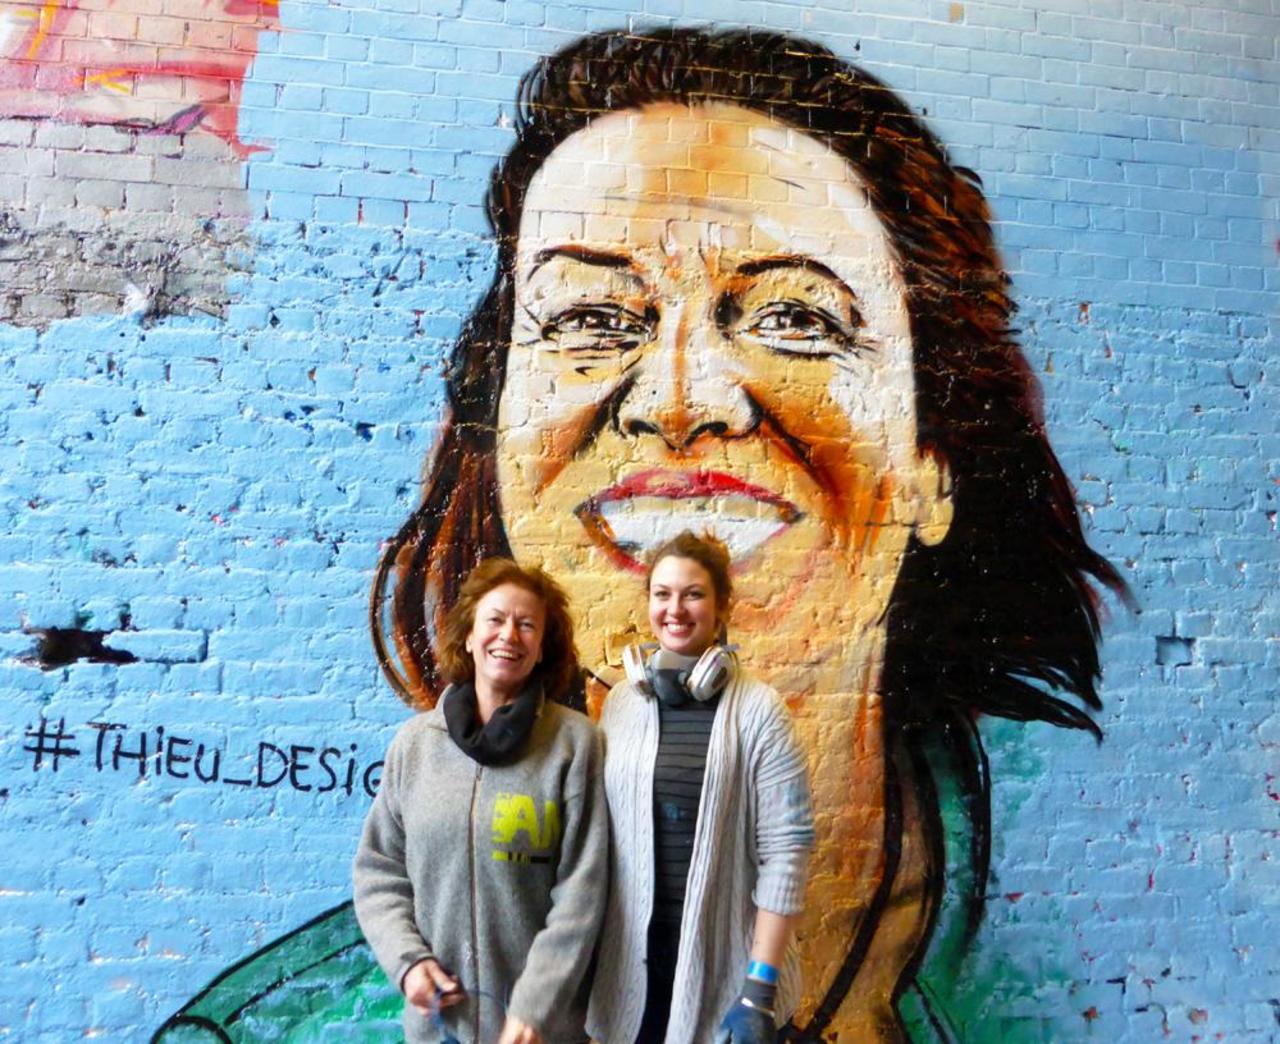 My favourite photo from @FemmeFierceUK yesterday @Thieu_Design and her mother #streetart #graffiti #mural @PlanUK http://t.co/vMhg3Wumg8